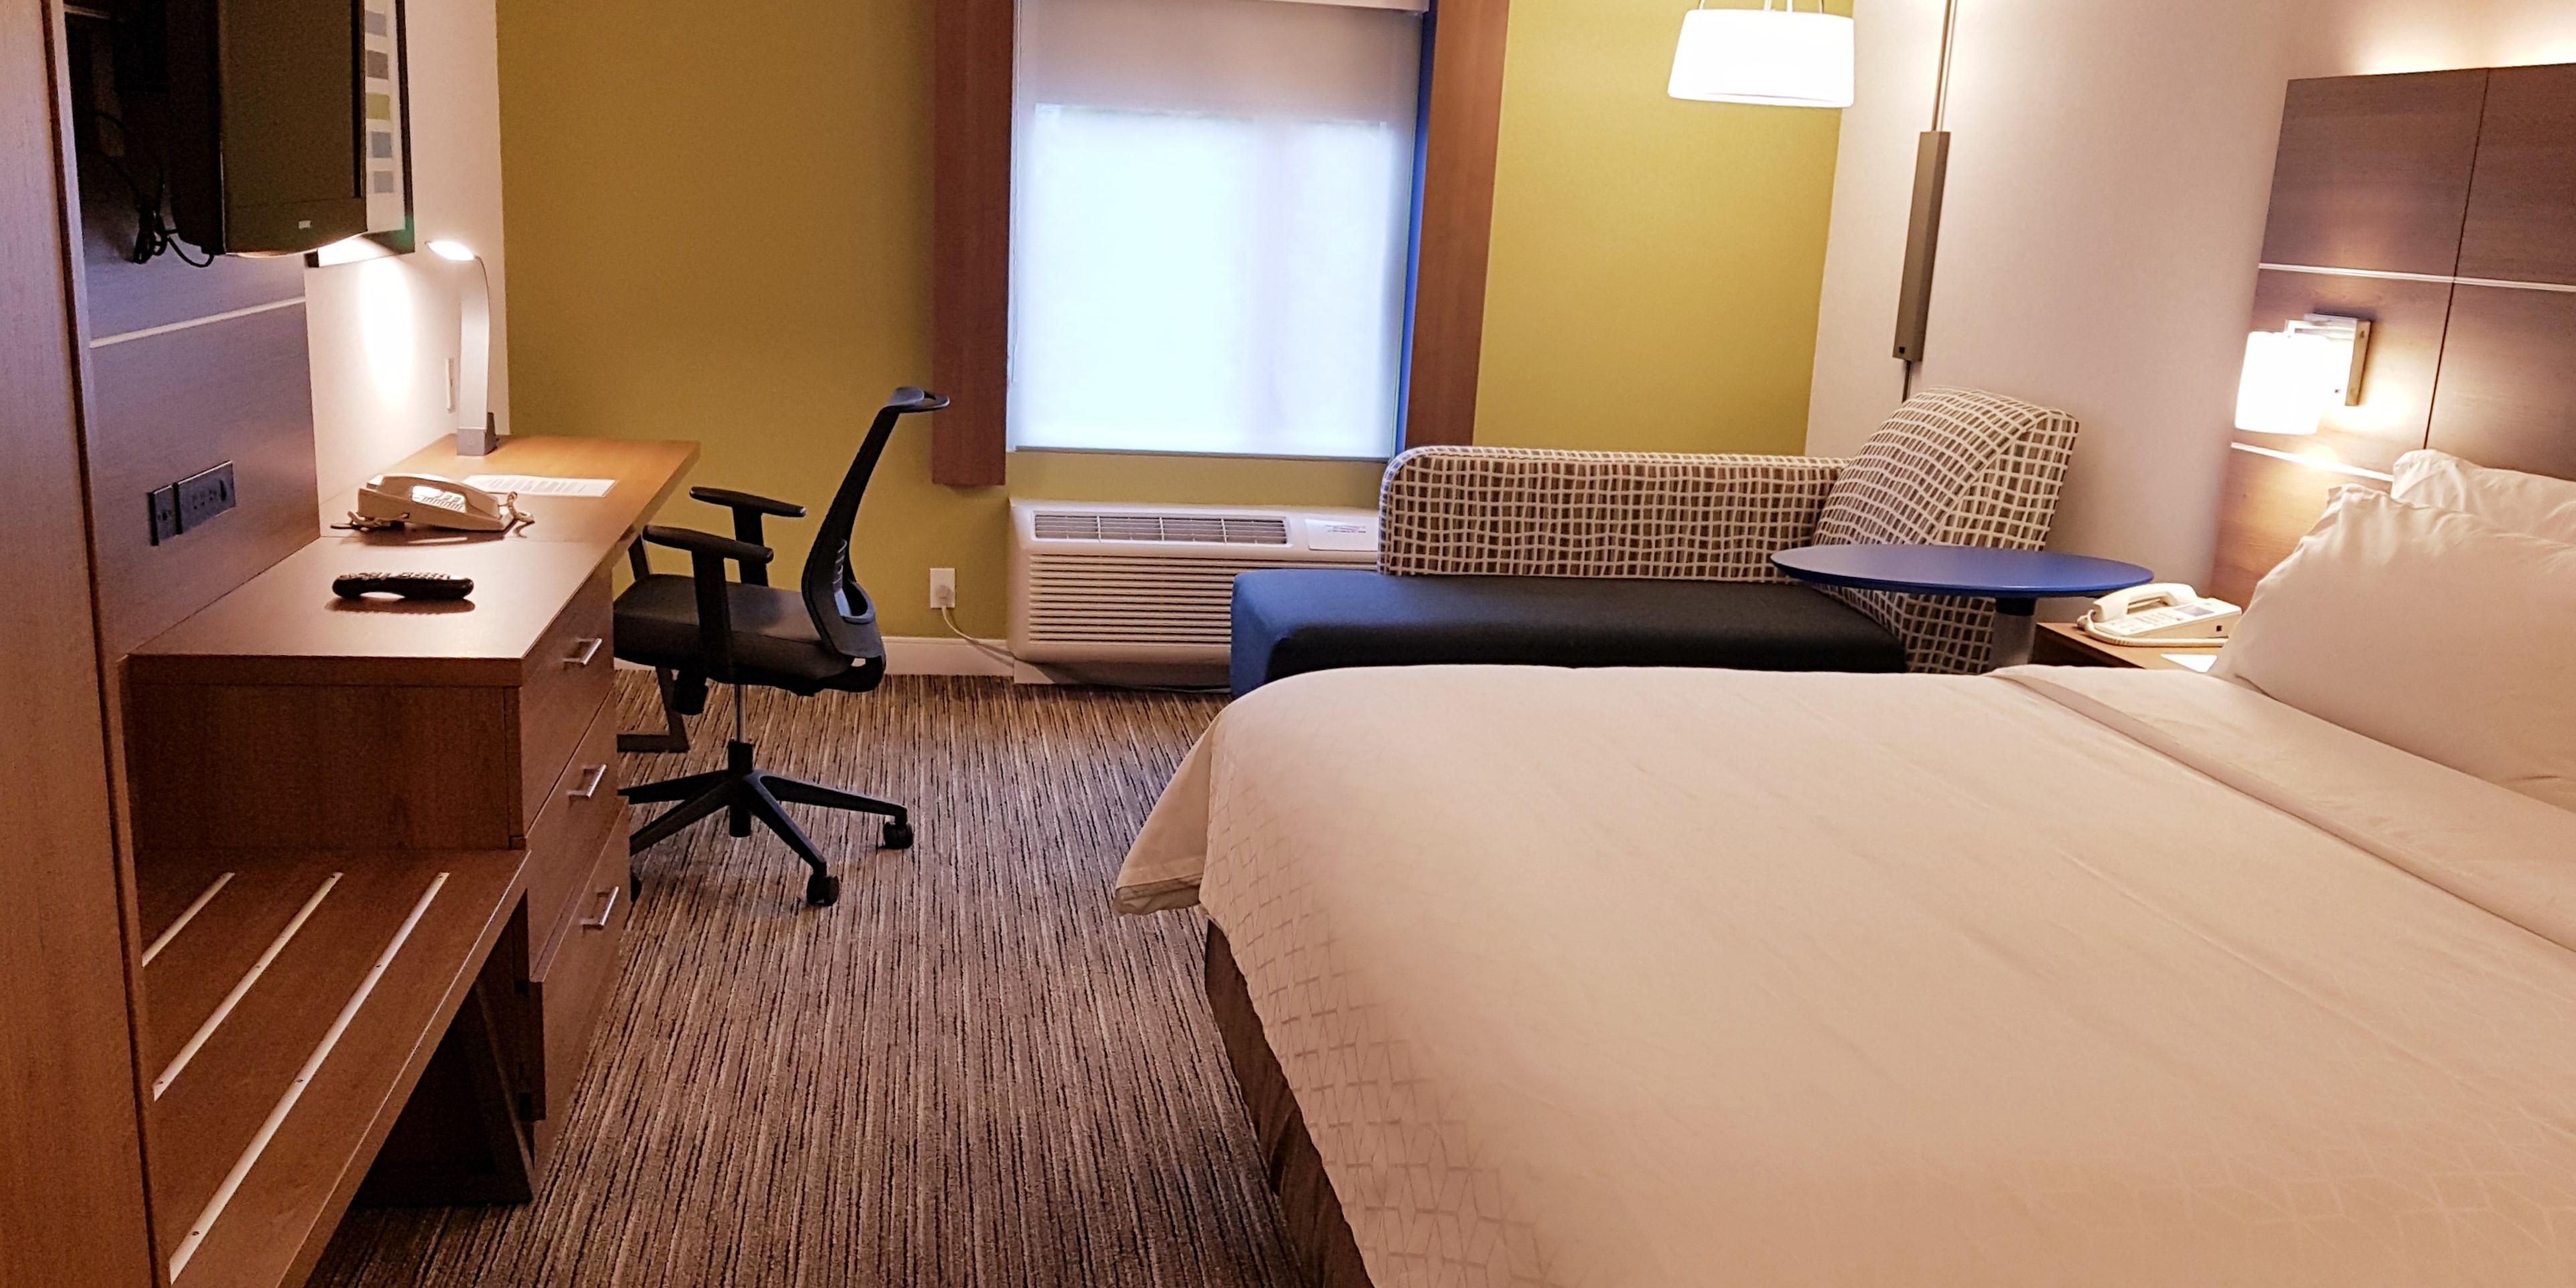 Our guests are raving about our newly renovated guest rooms with updated décor and brand new Beautyrest beds. Perfect for any Workcation or Staycation.